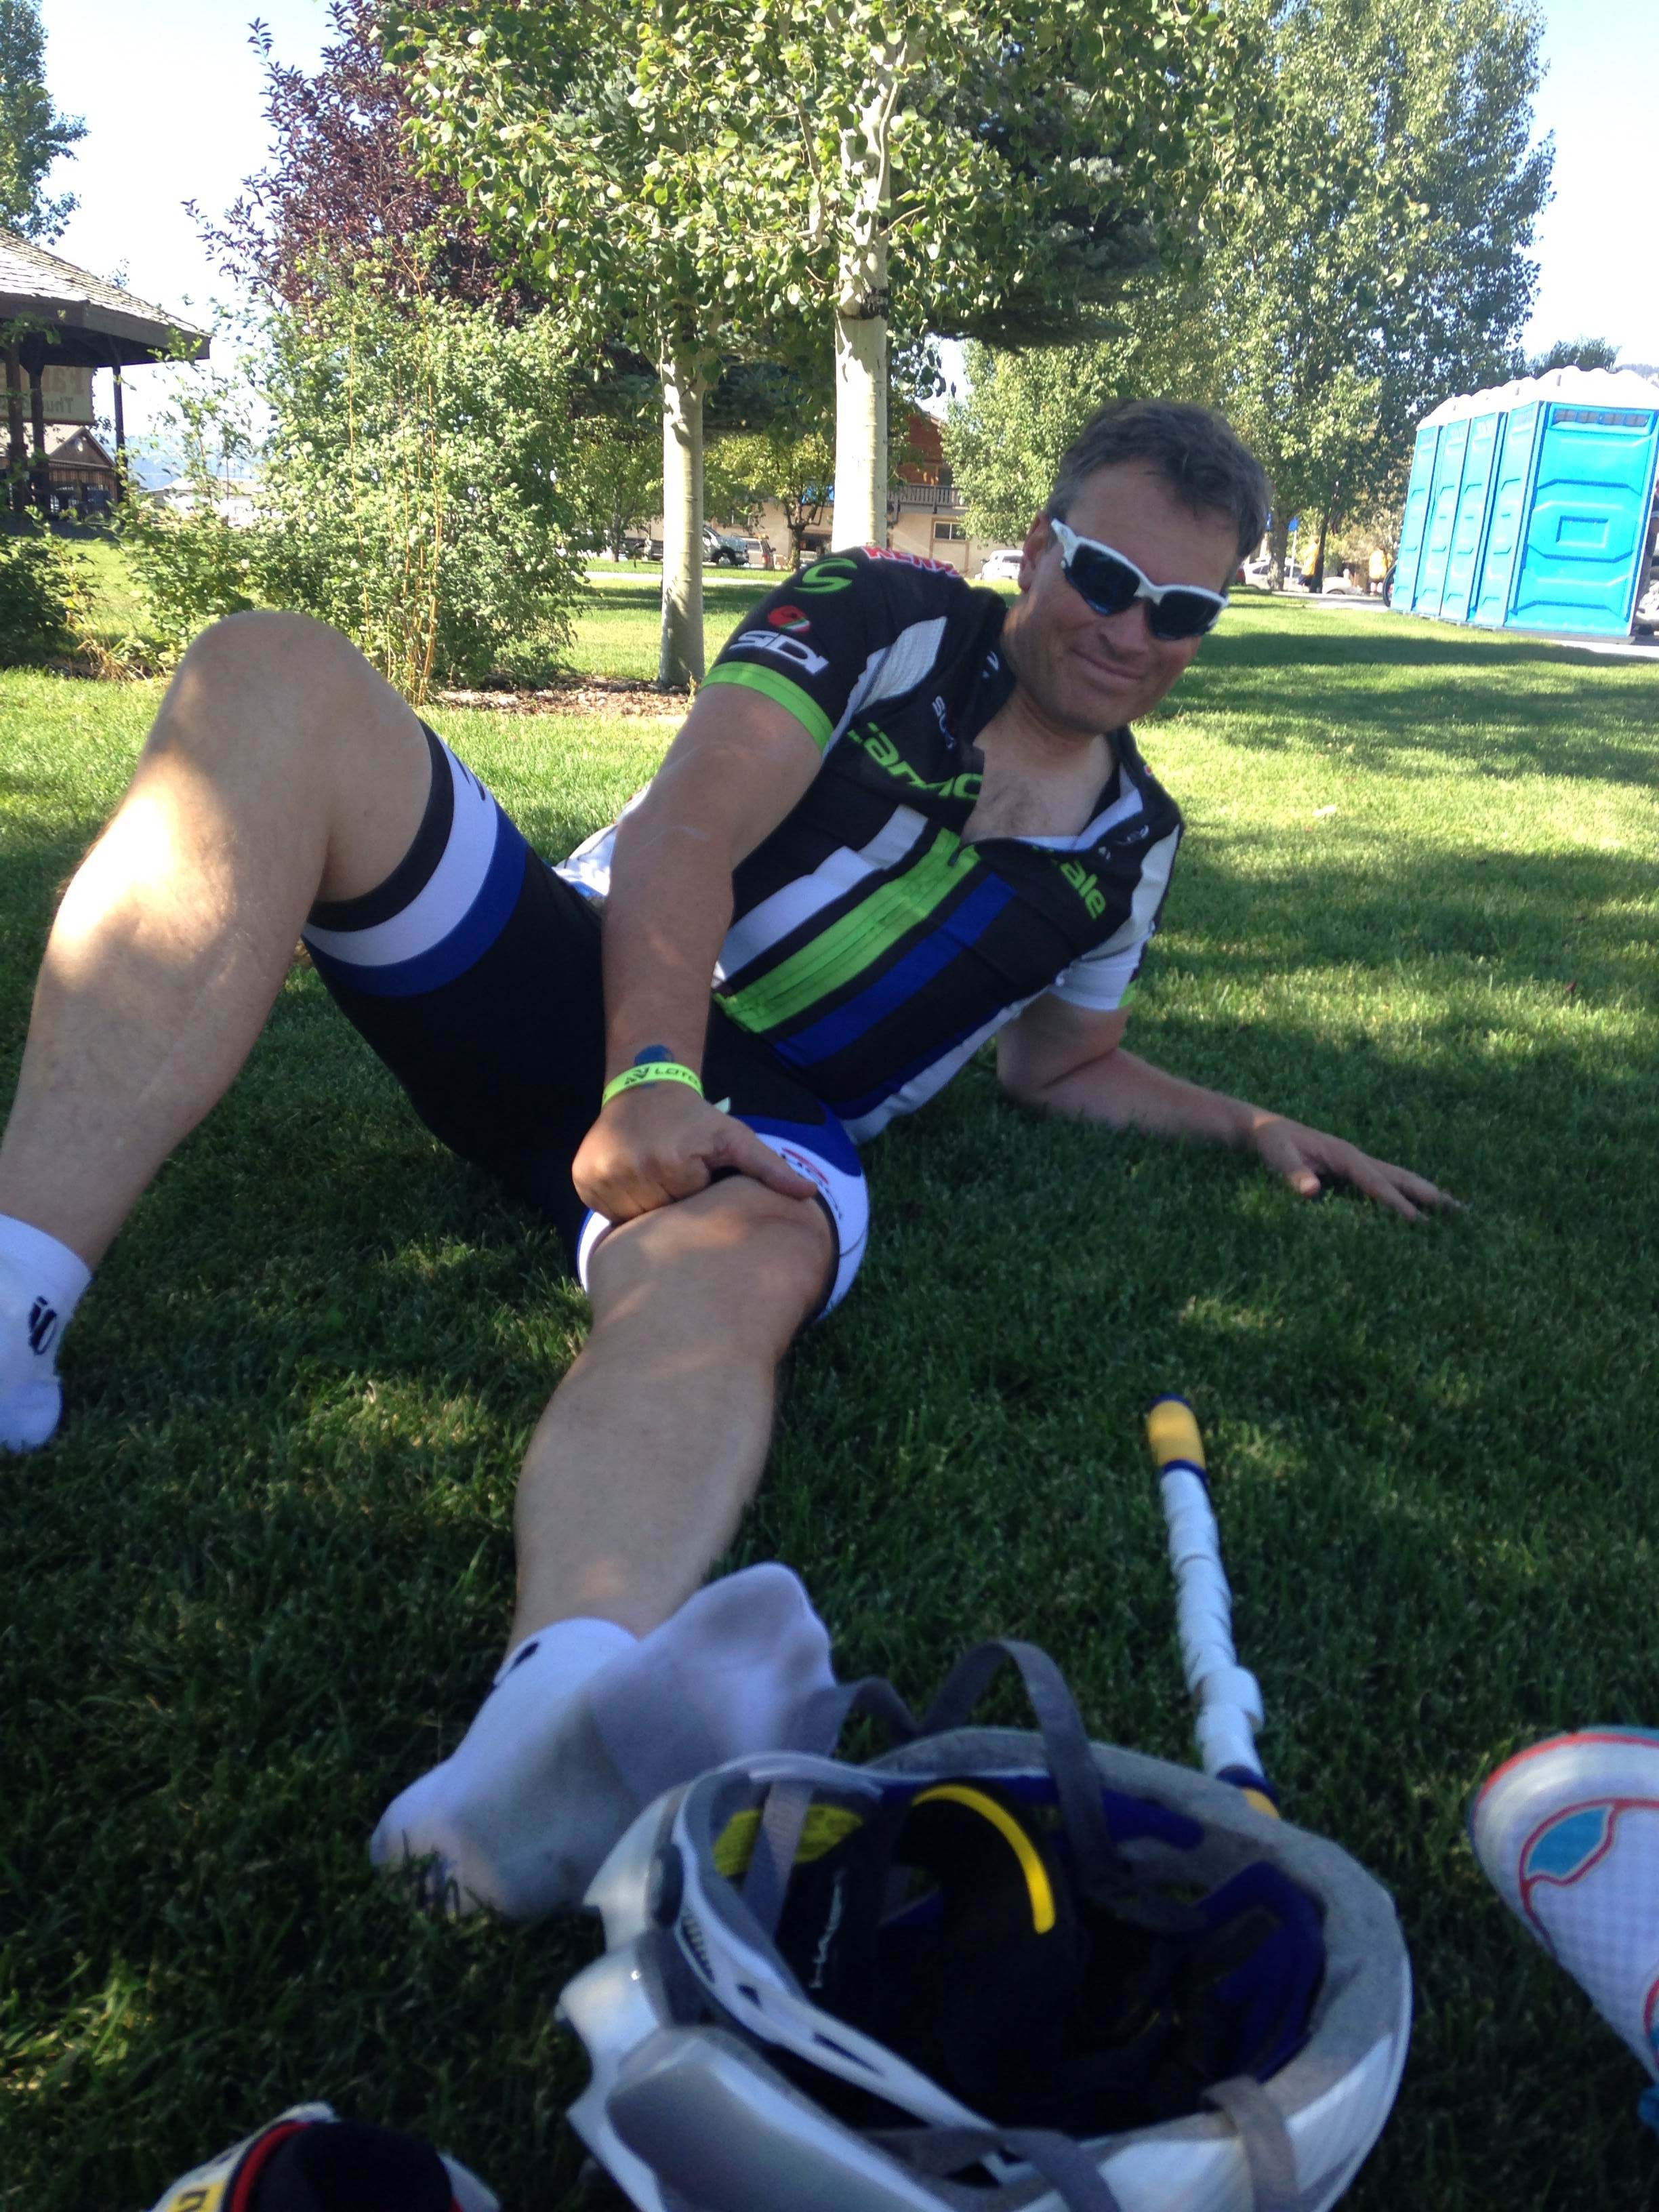 AFTER THE RACE, cyclist Kyle Morris works cramps out of his legs.